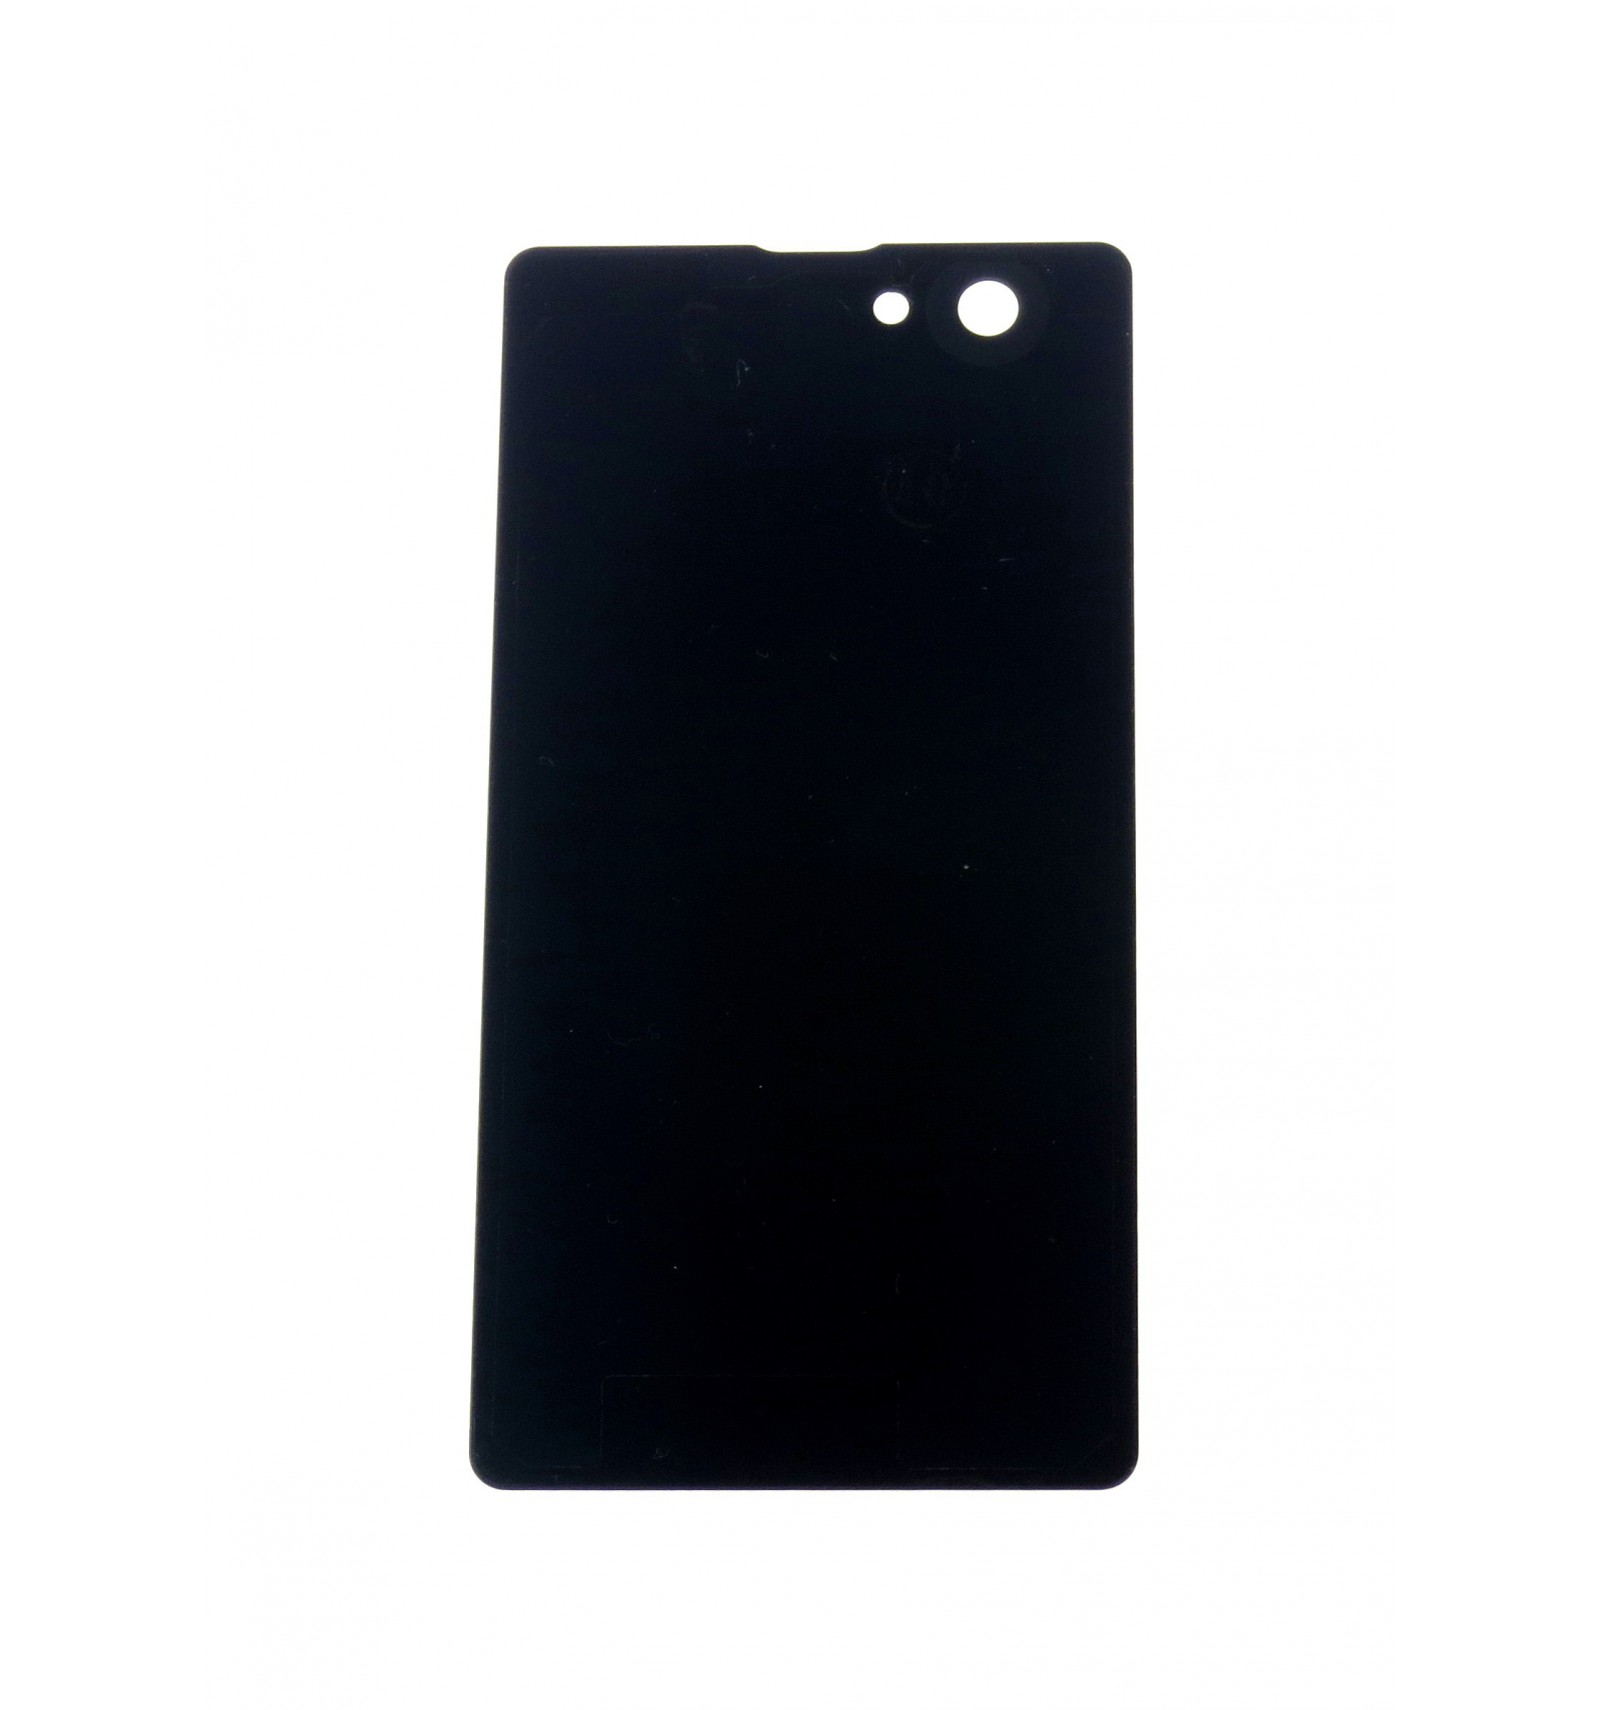 Battery cover black OEM for Sony Xperia Z1 compact D5503 ...